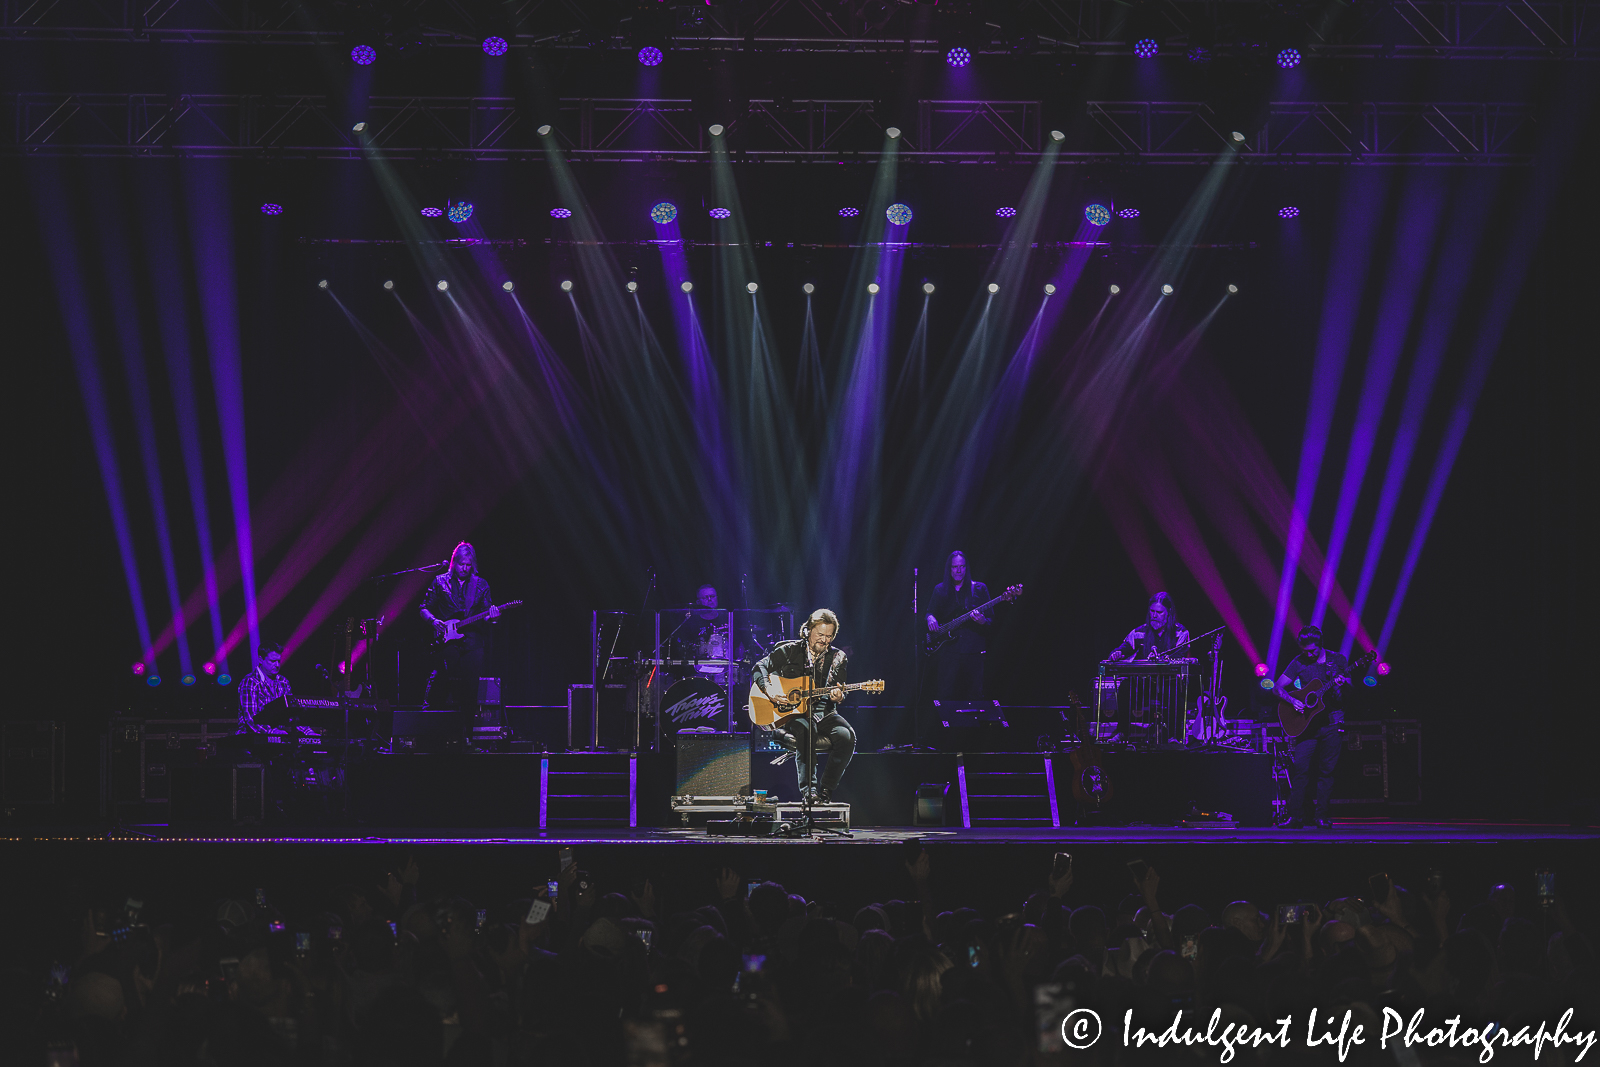 Travis Tritt starting his seated portion of his set at at Ameristar Casino's Star Pavilion on December 10, 2022.